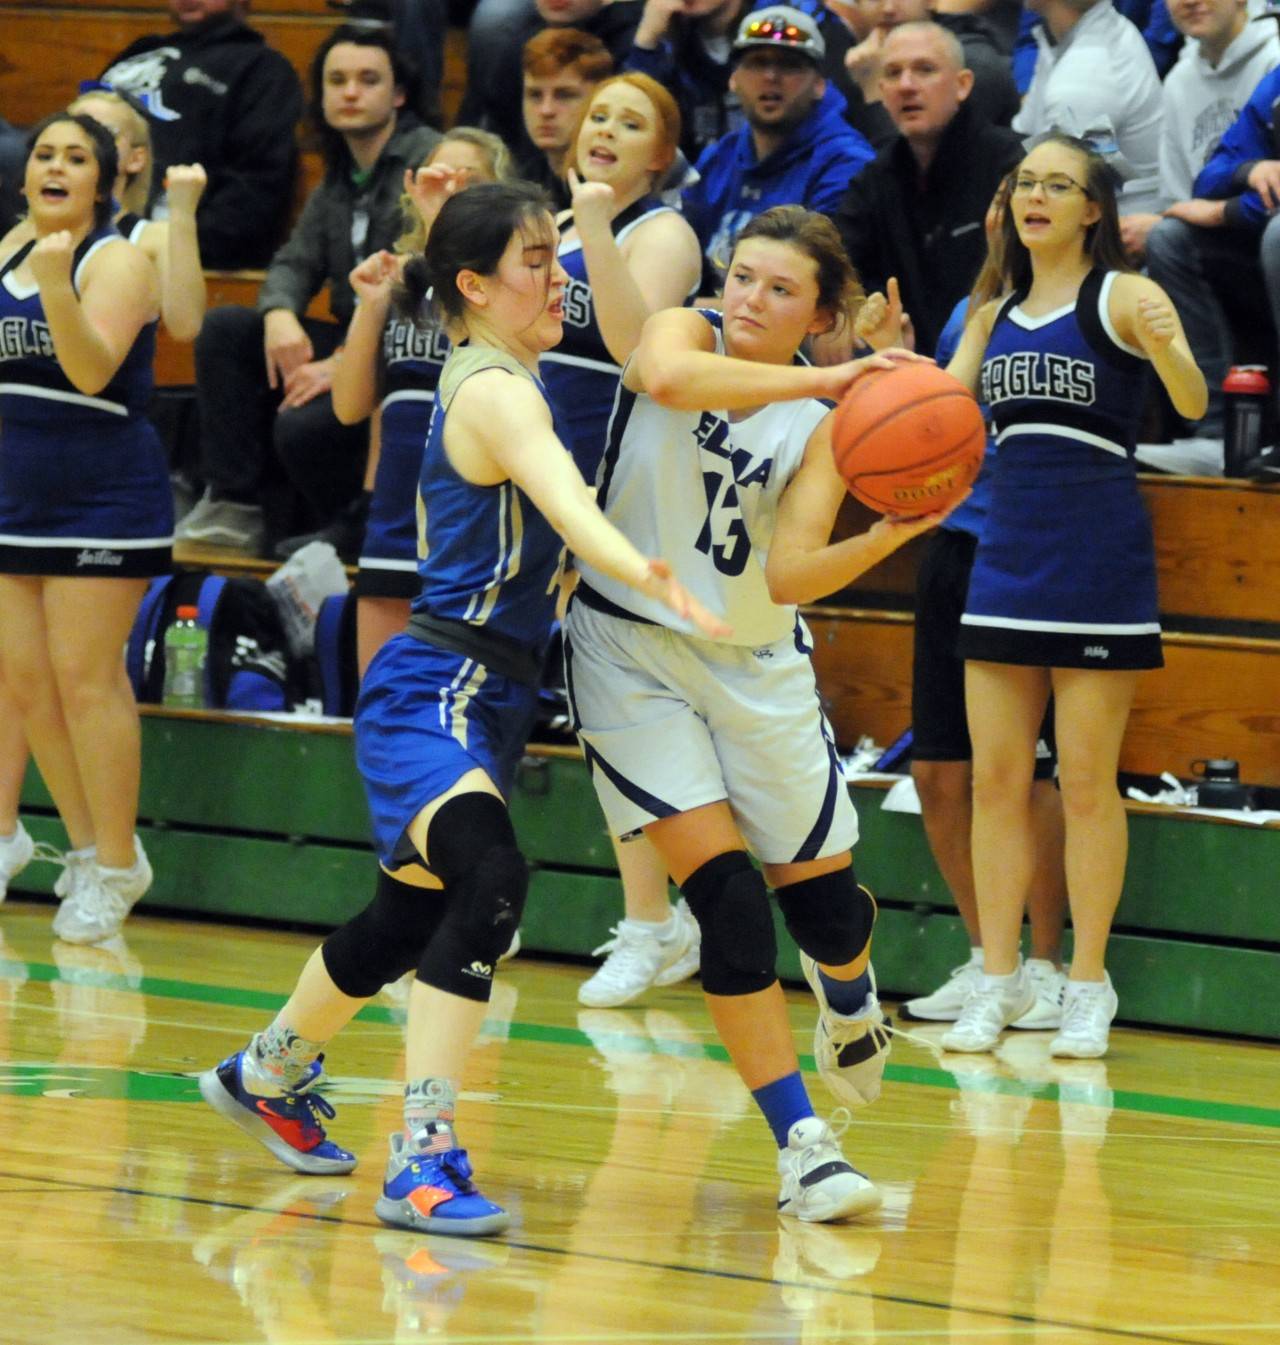 Elma’s Kali Rambo, right, is defended by Deer Parks Havelah Fairbanks during Saturday’s 1A regional round game at Tumwater High School. (Ryan Sparks | Grays Harbor News Group)